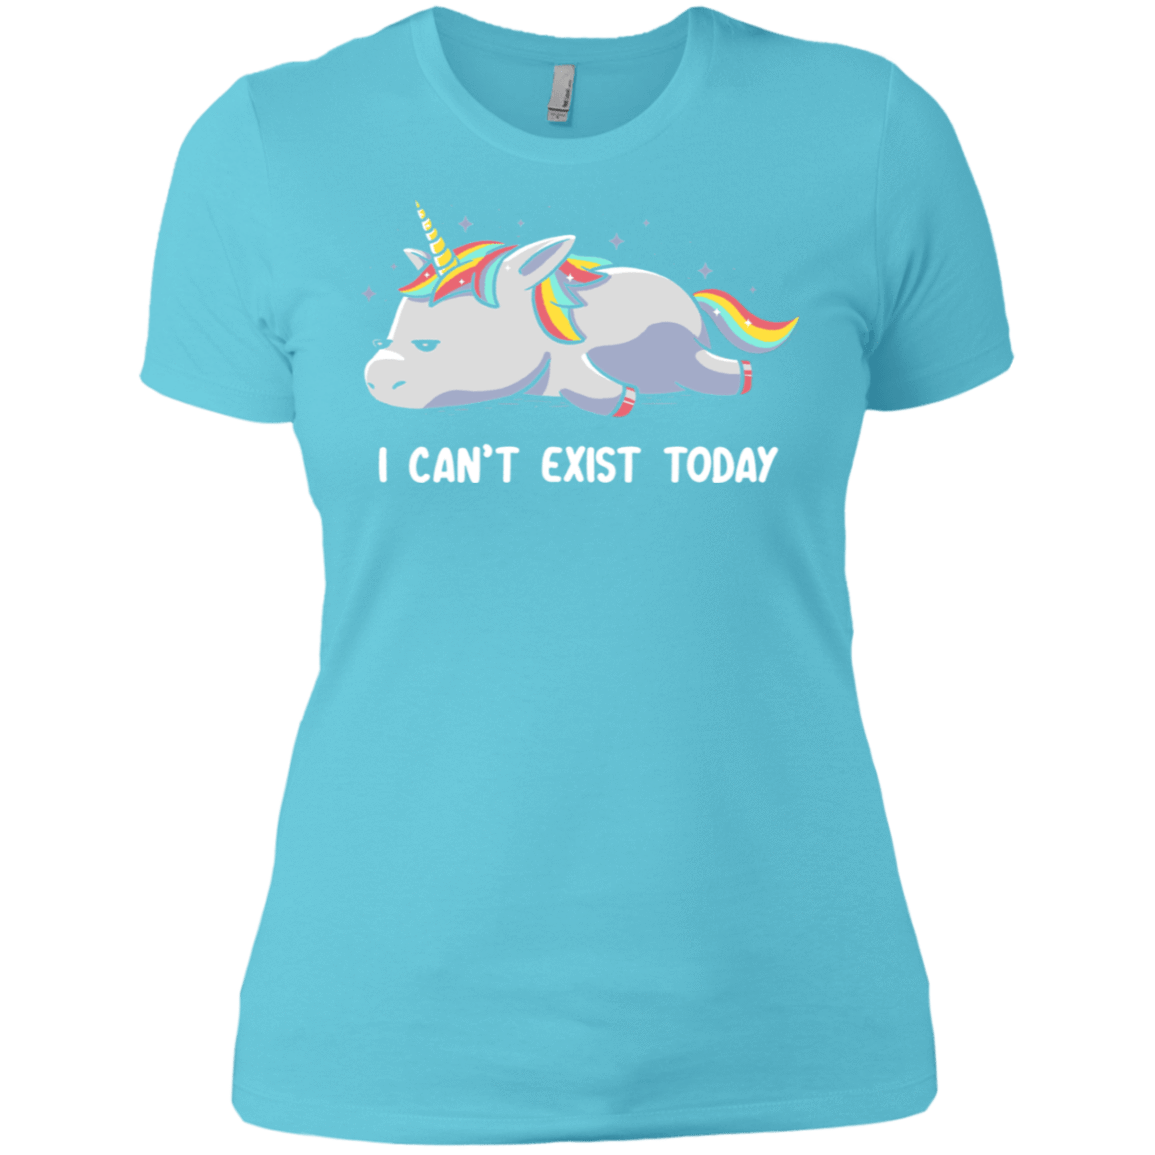 T-Shirts Cancun / X-Small I Can't Exist Today Women's Premium T-Shirt